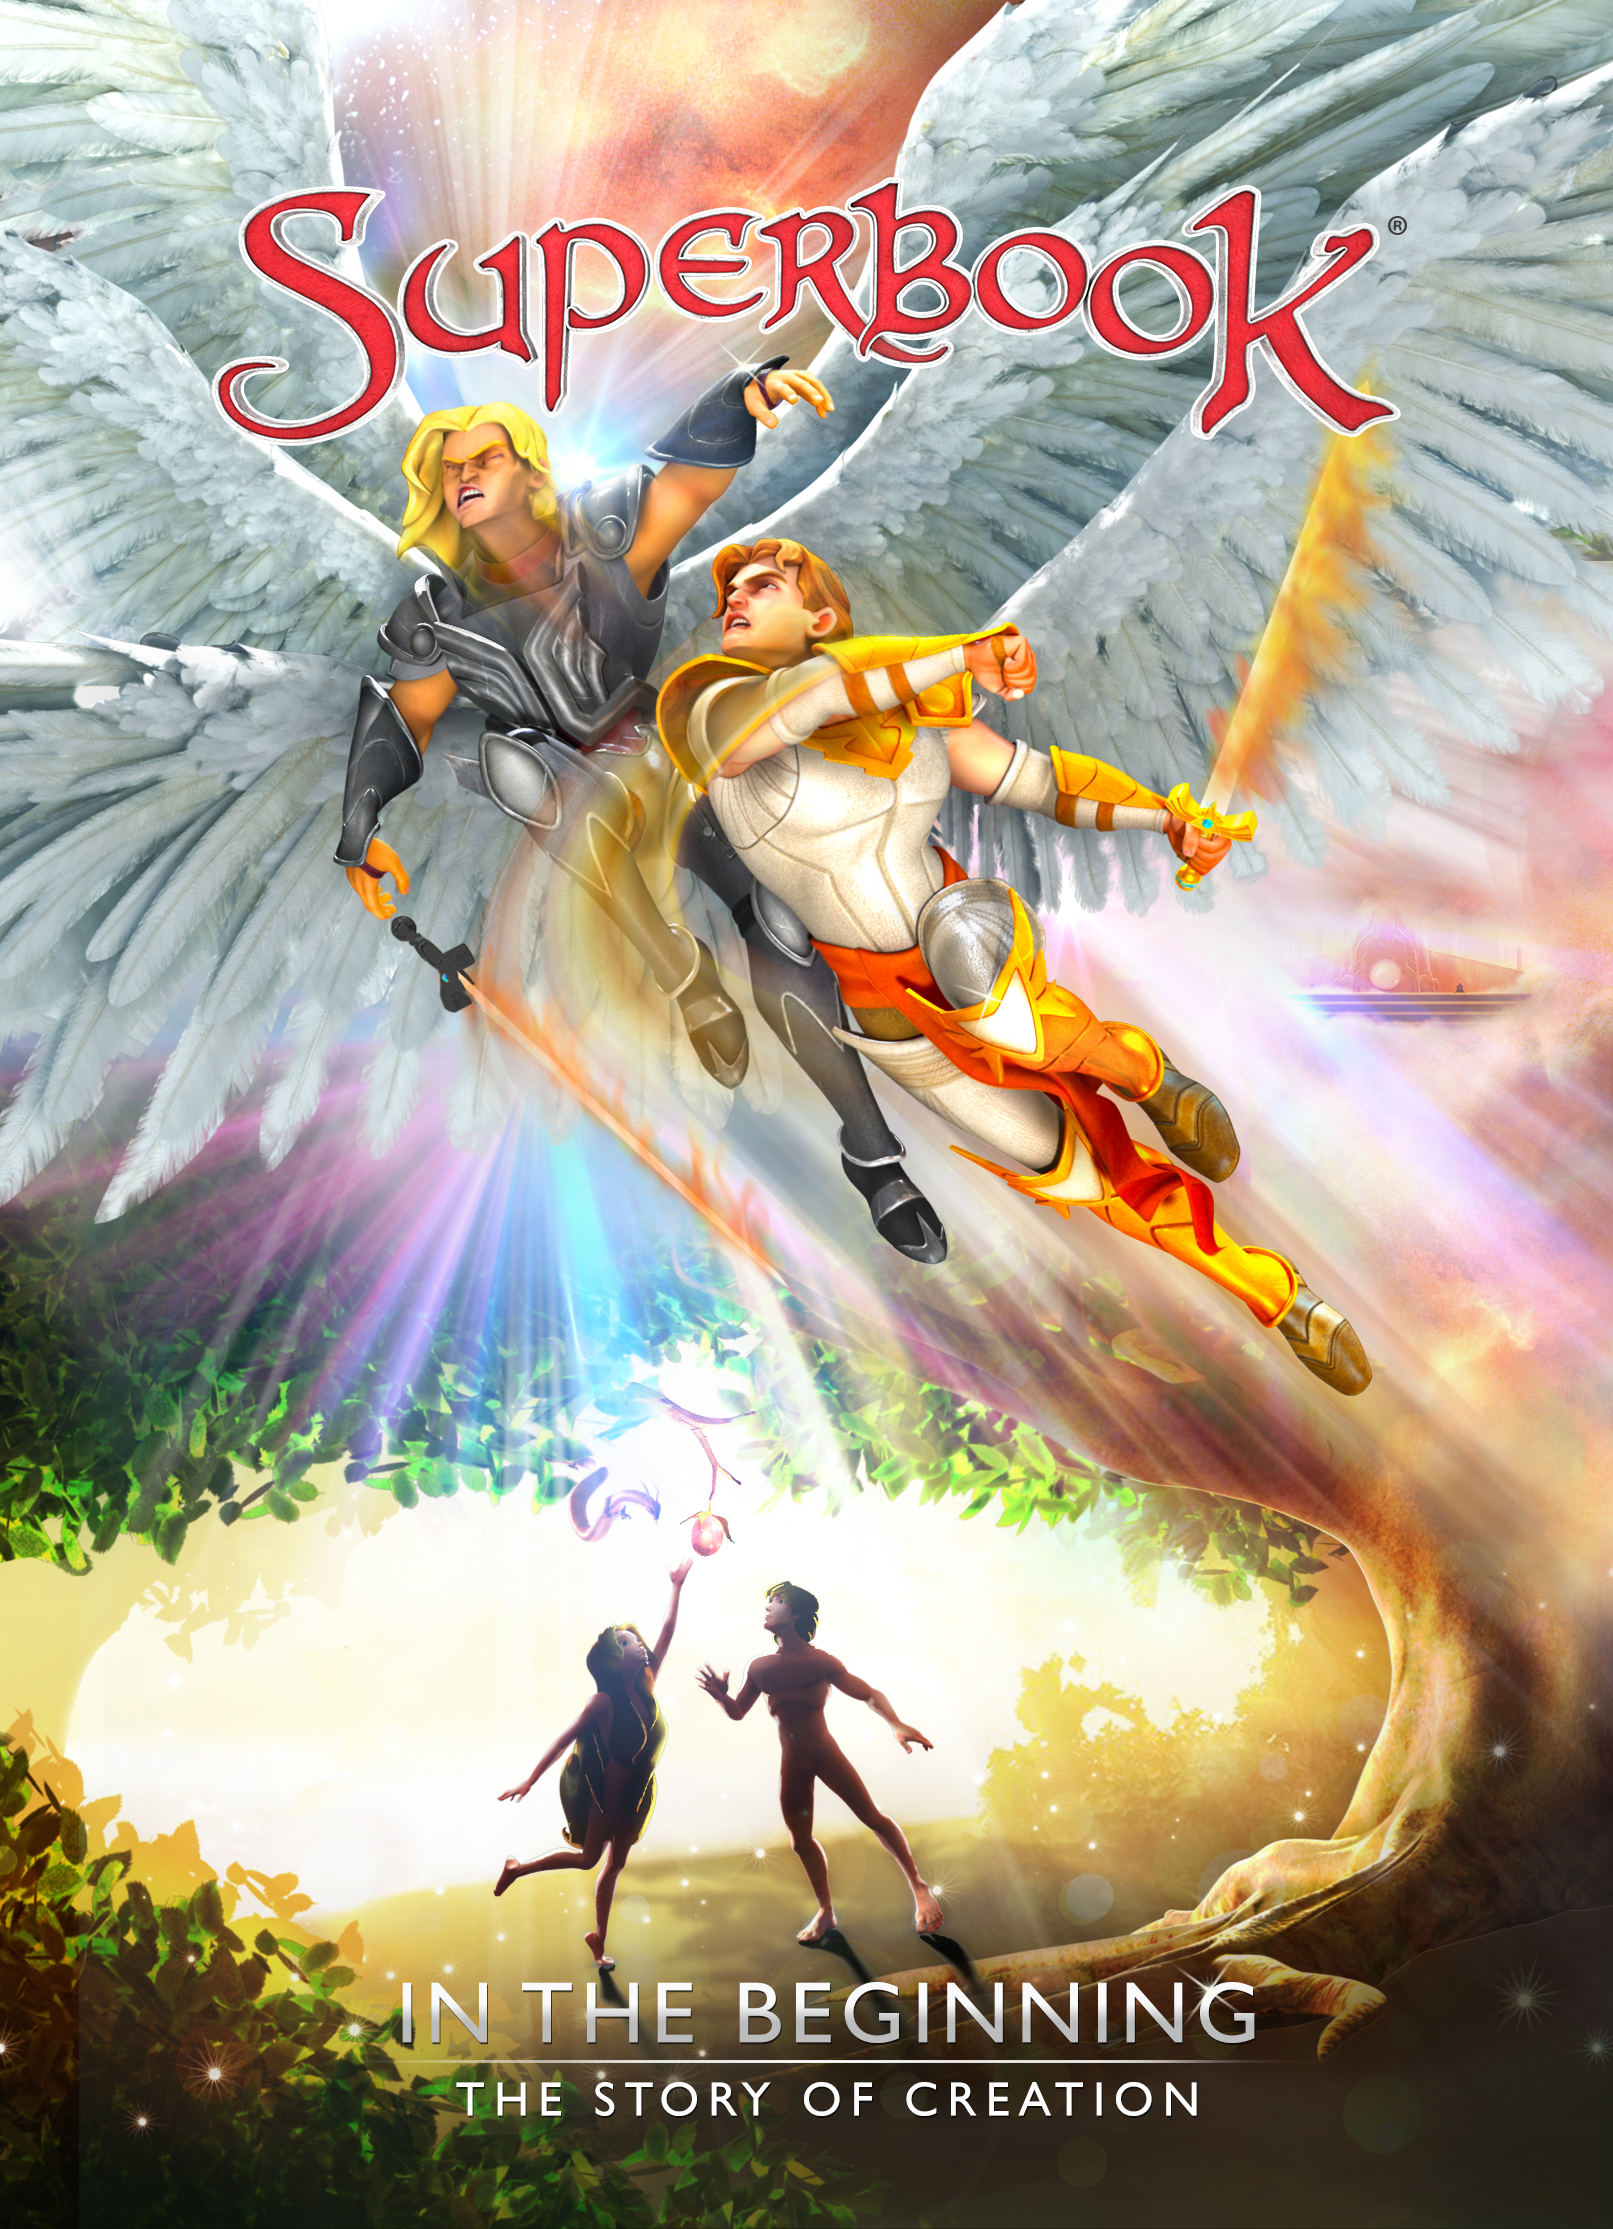 Superbook Episode 101 In The Beginning: The Story Of Creation